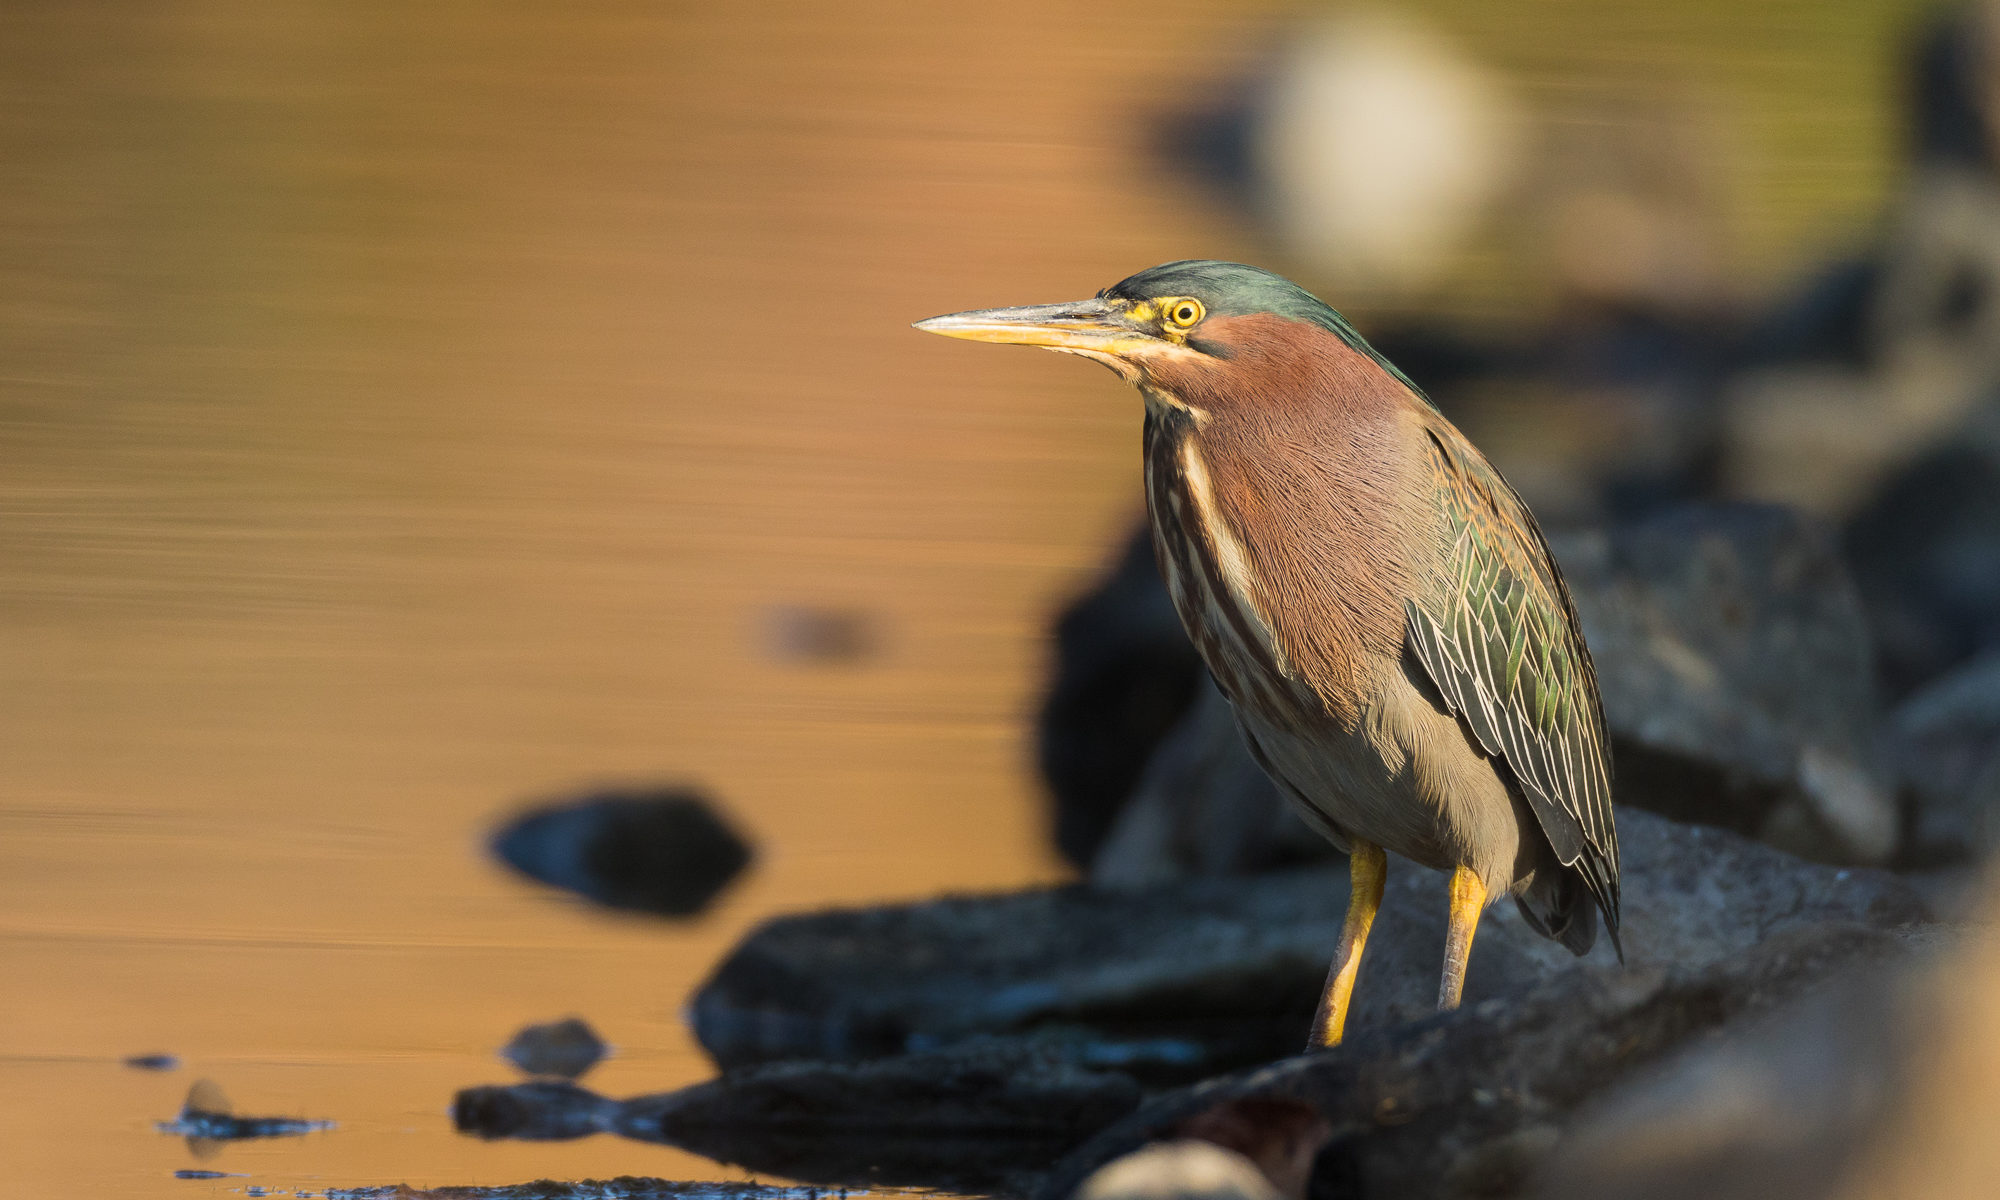 A green heron perches next to still water, reflecting fall colors, Redwood Shores, CA.